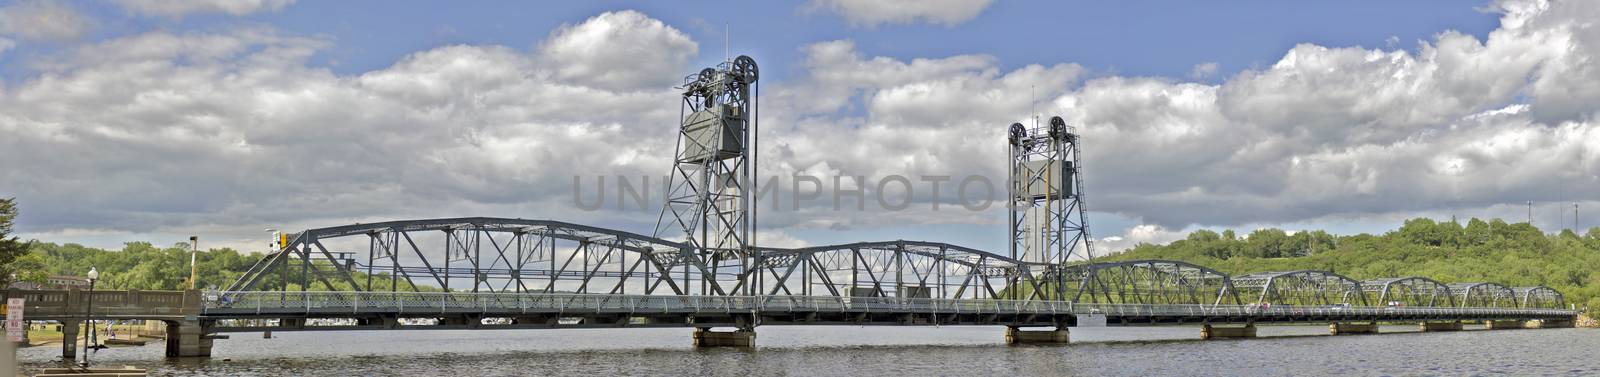 Stillwater Lift Bridge Panorama in HDR by bkenney5@gmail.com